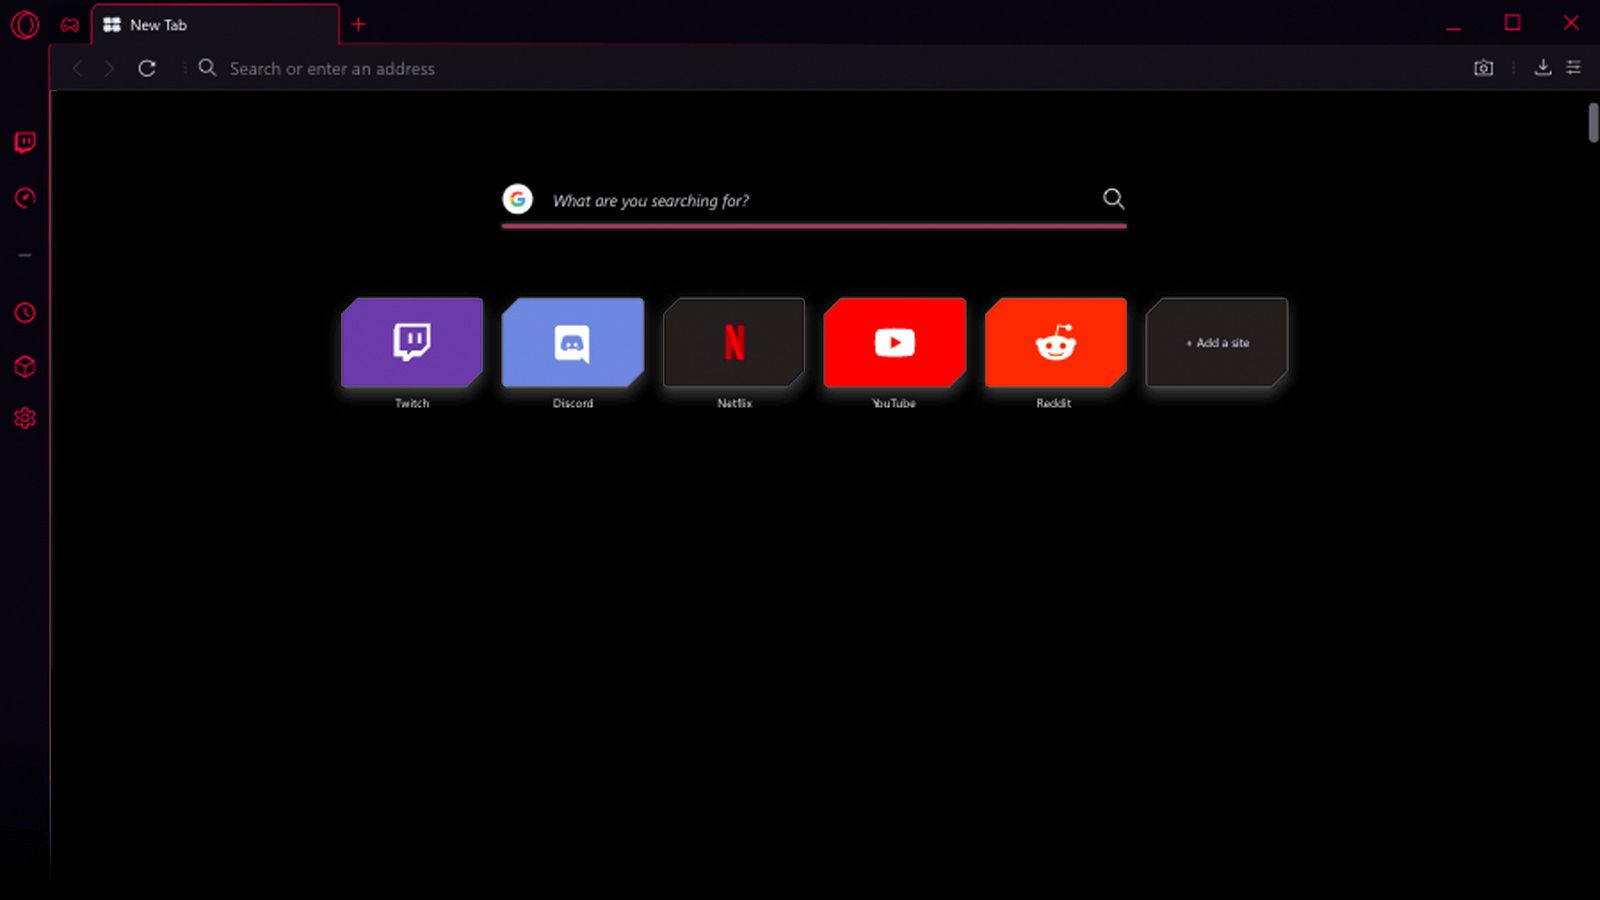 Opera GX, the Browser for Gamers, Surpasses 25 Million Monthly Active Users